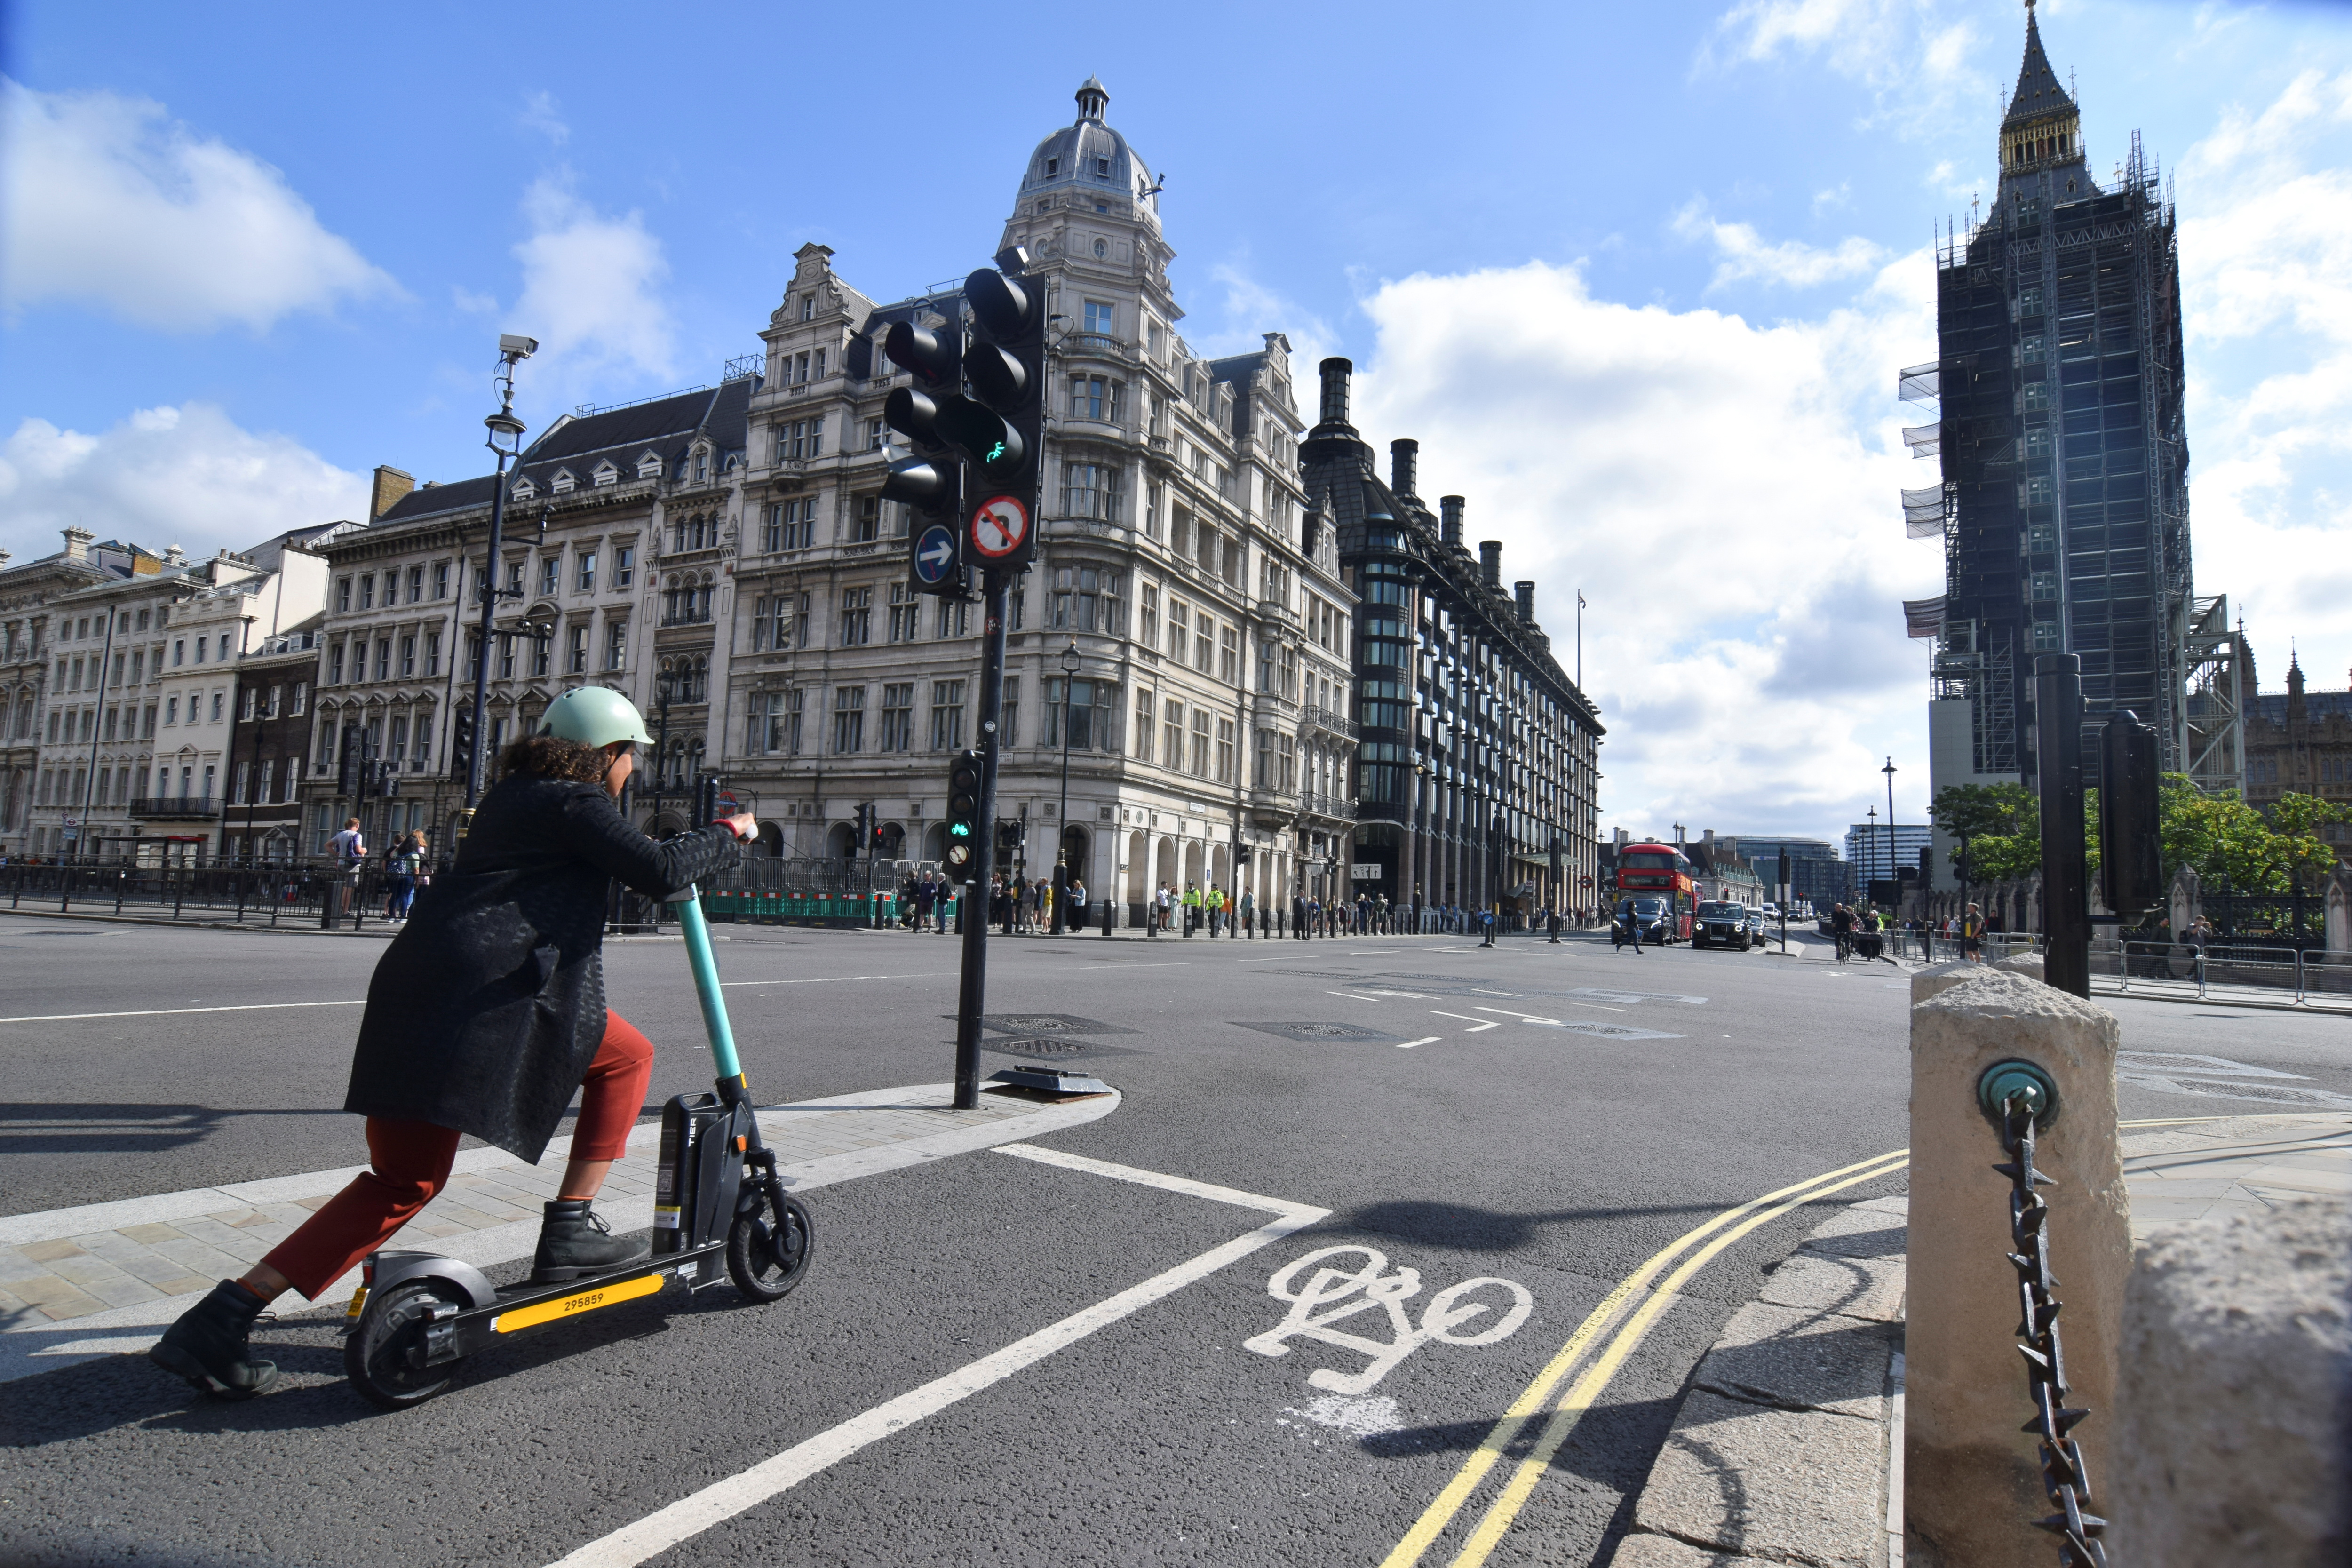 Tier demonstration of an e-scooter in London